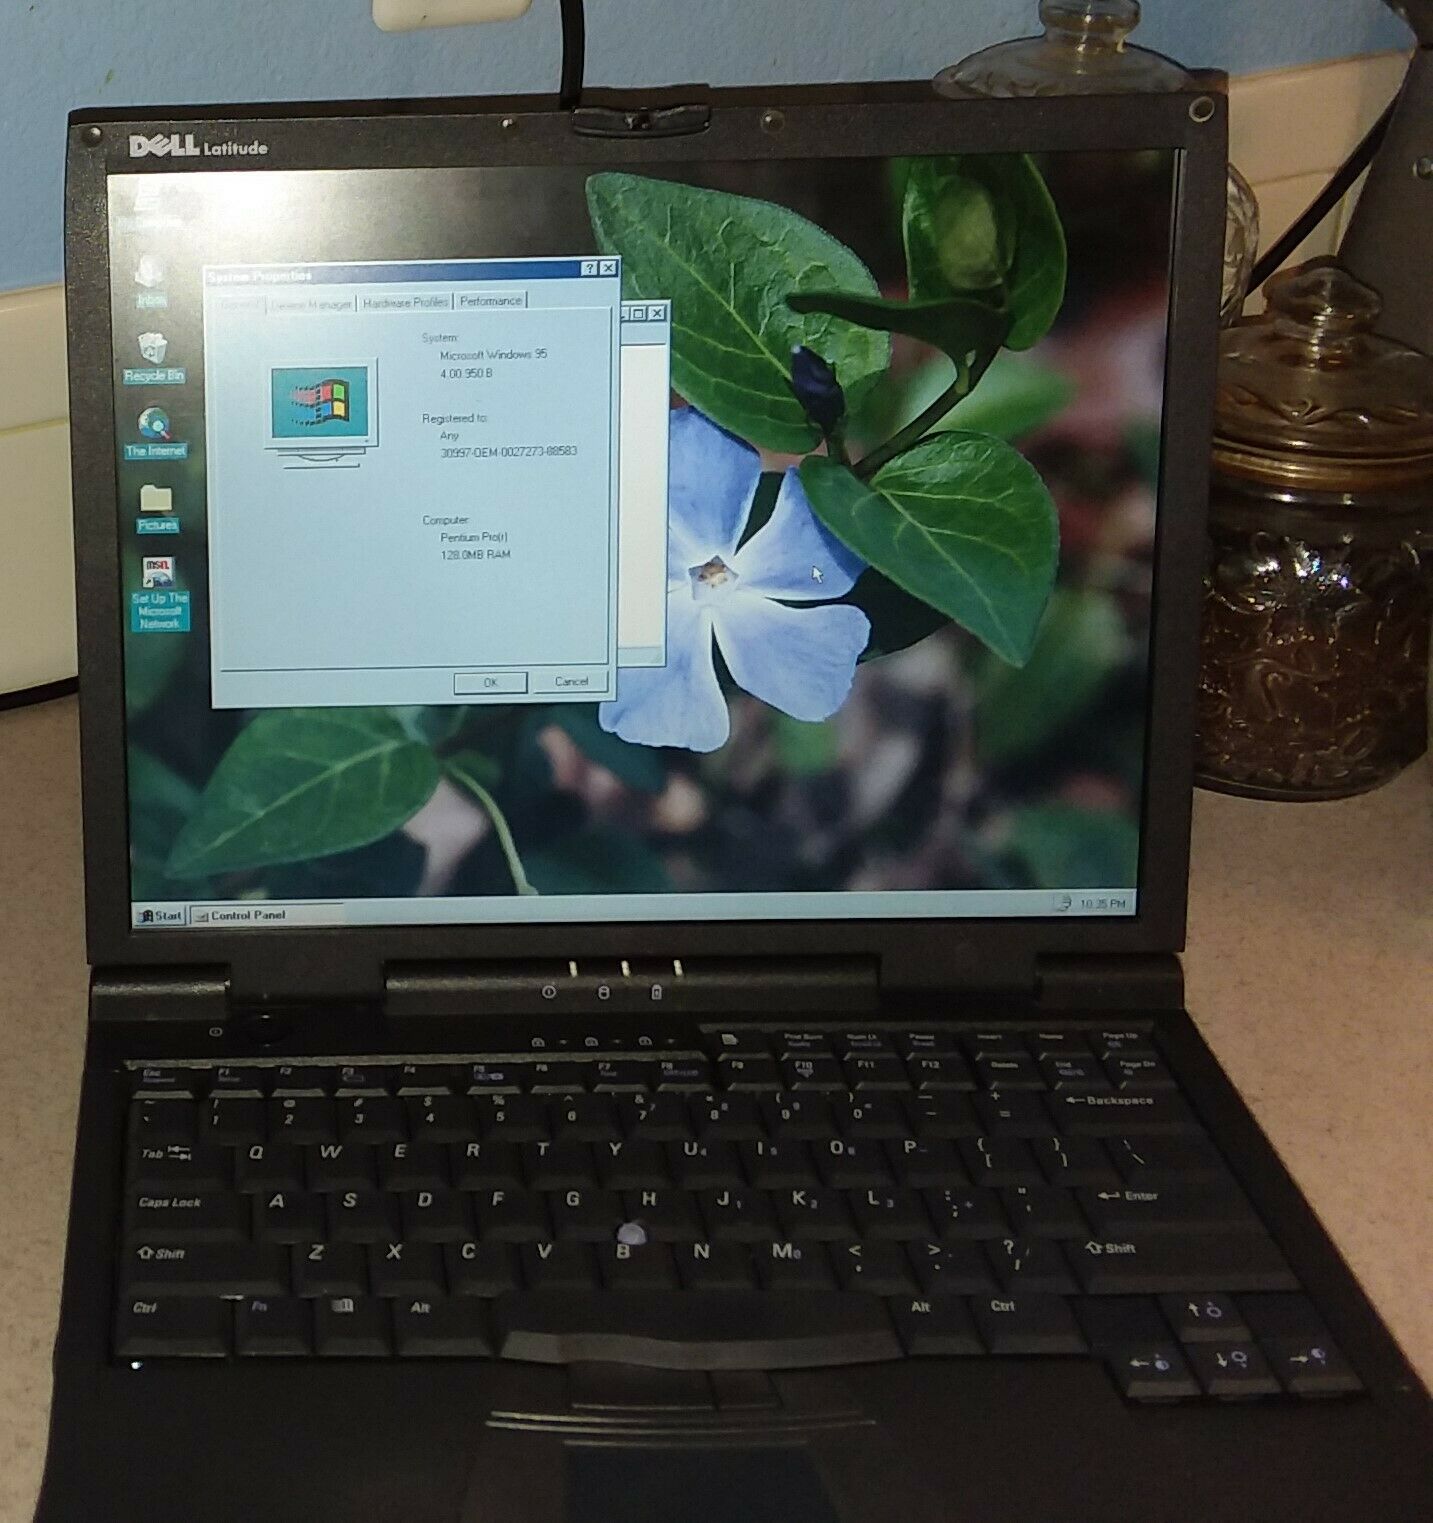 Dell Latitude CPx 650 Refurbished laptop with Windows 95, serial port and floppy drive